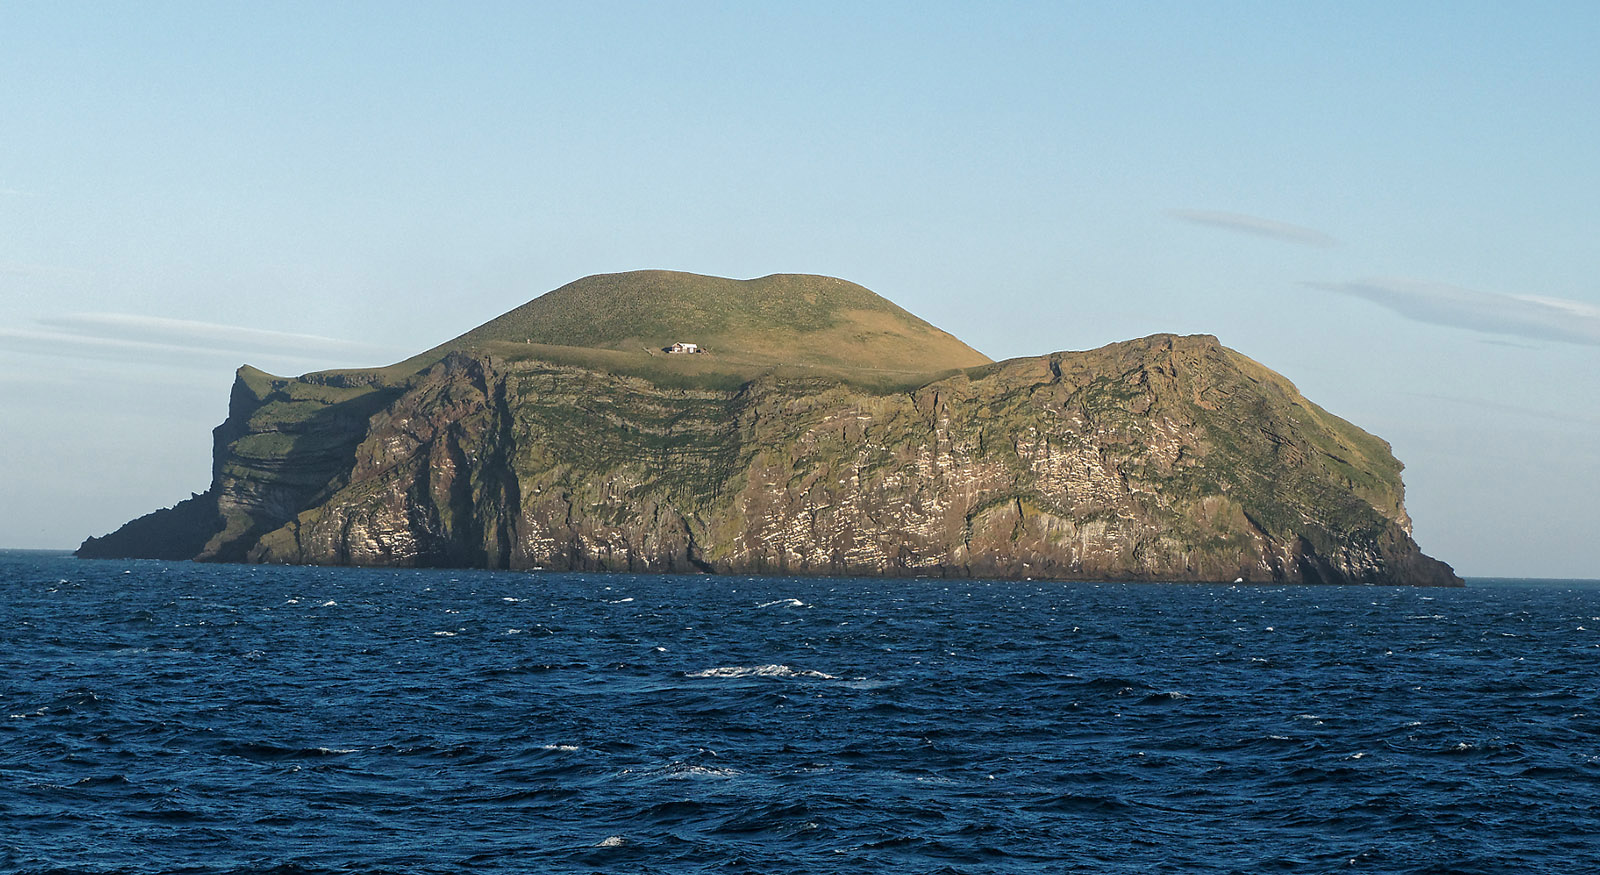 Bjarnarey, one of the Westman Islands viewed from the ferry. The Westman Islands are an archipelago of 15 islands formed from 70-80 volcanoes along a branch of the Mid-Atlantic Ridge that have been active over the last 100 – 200 thousand years.